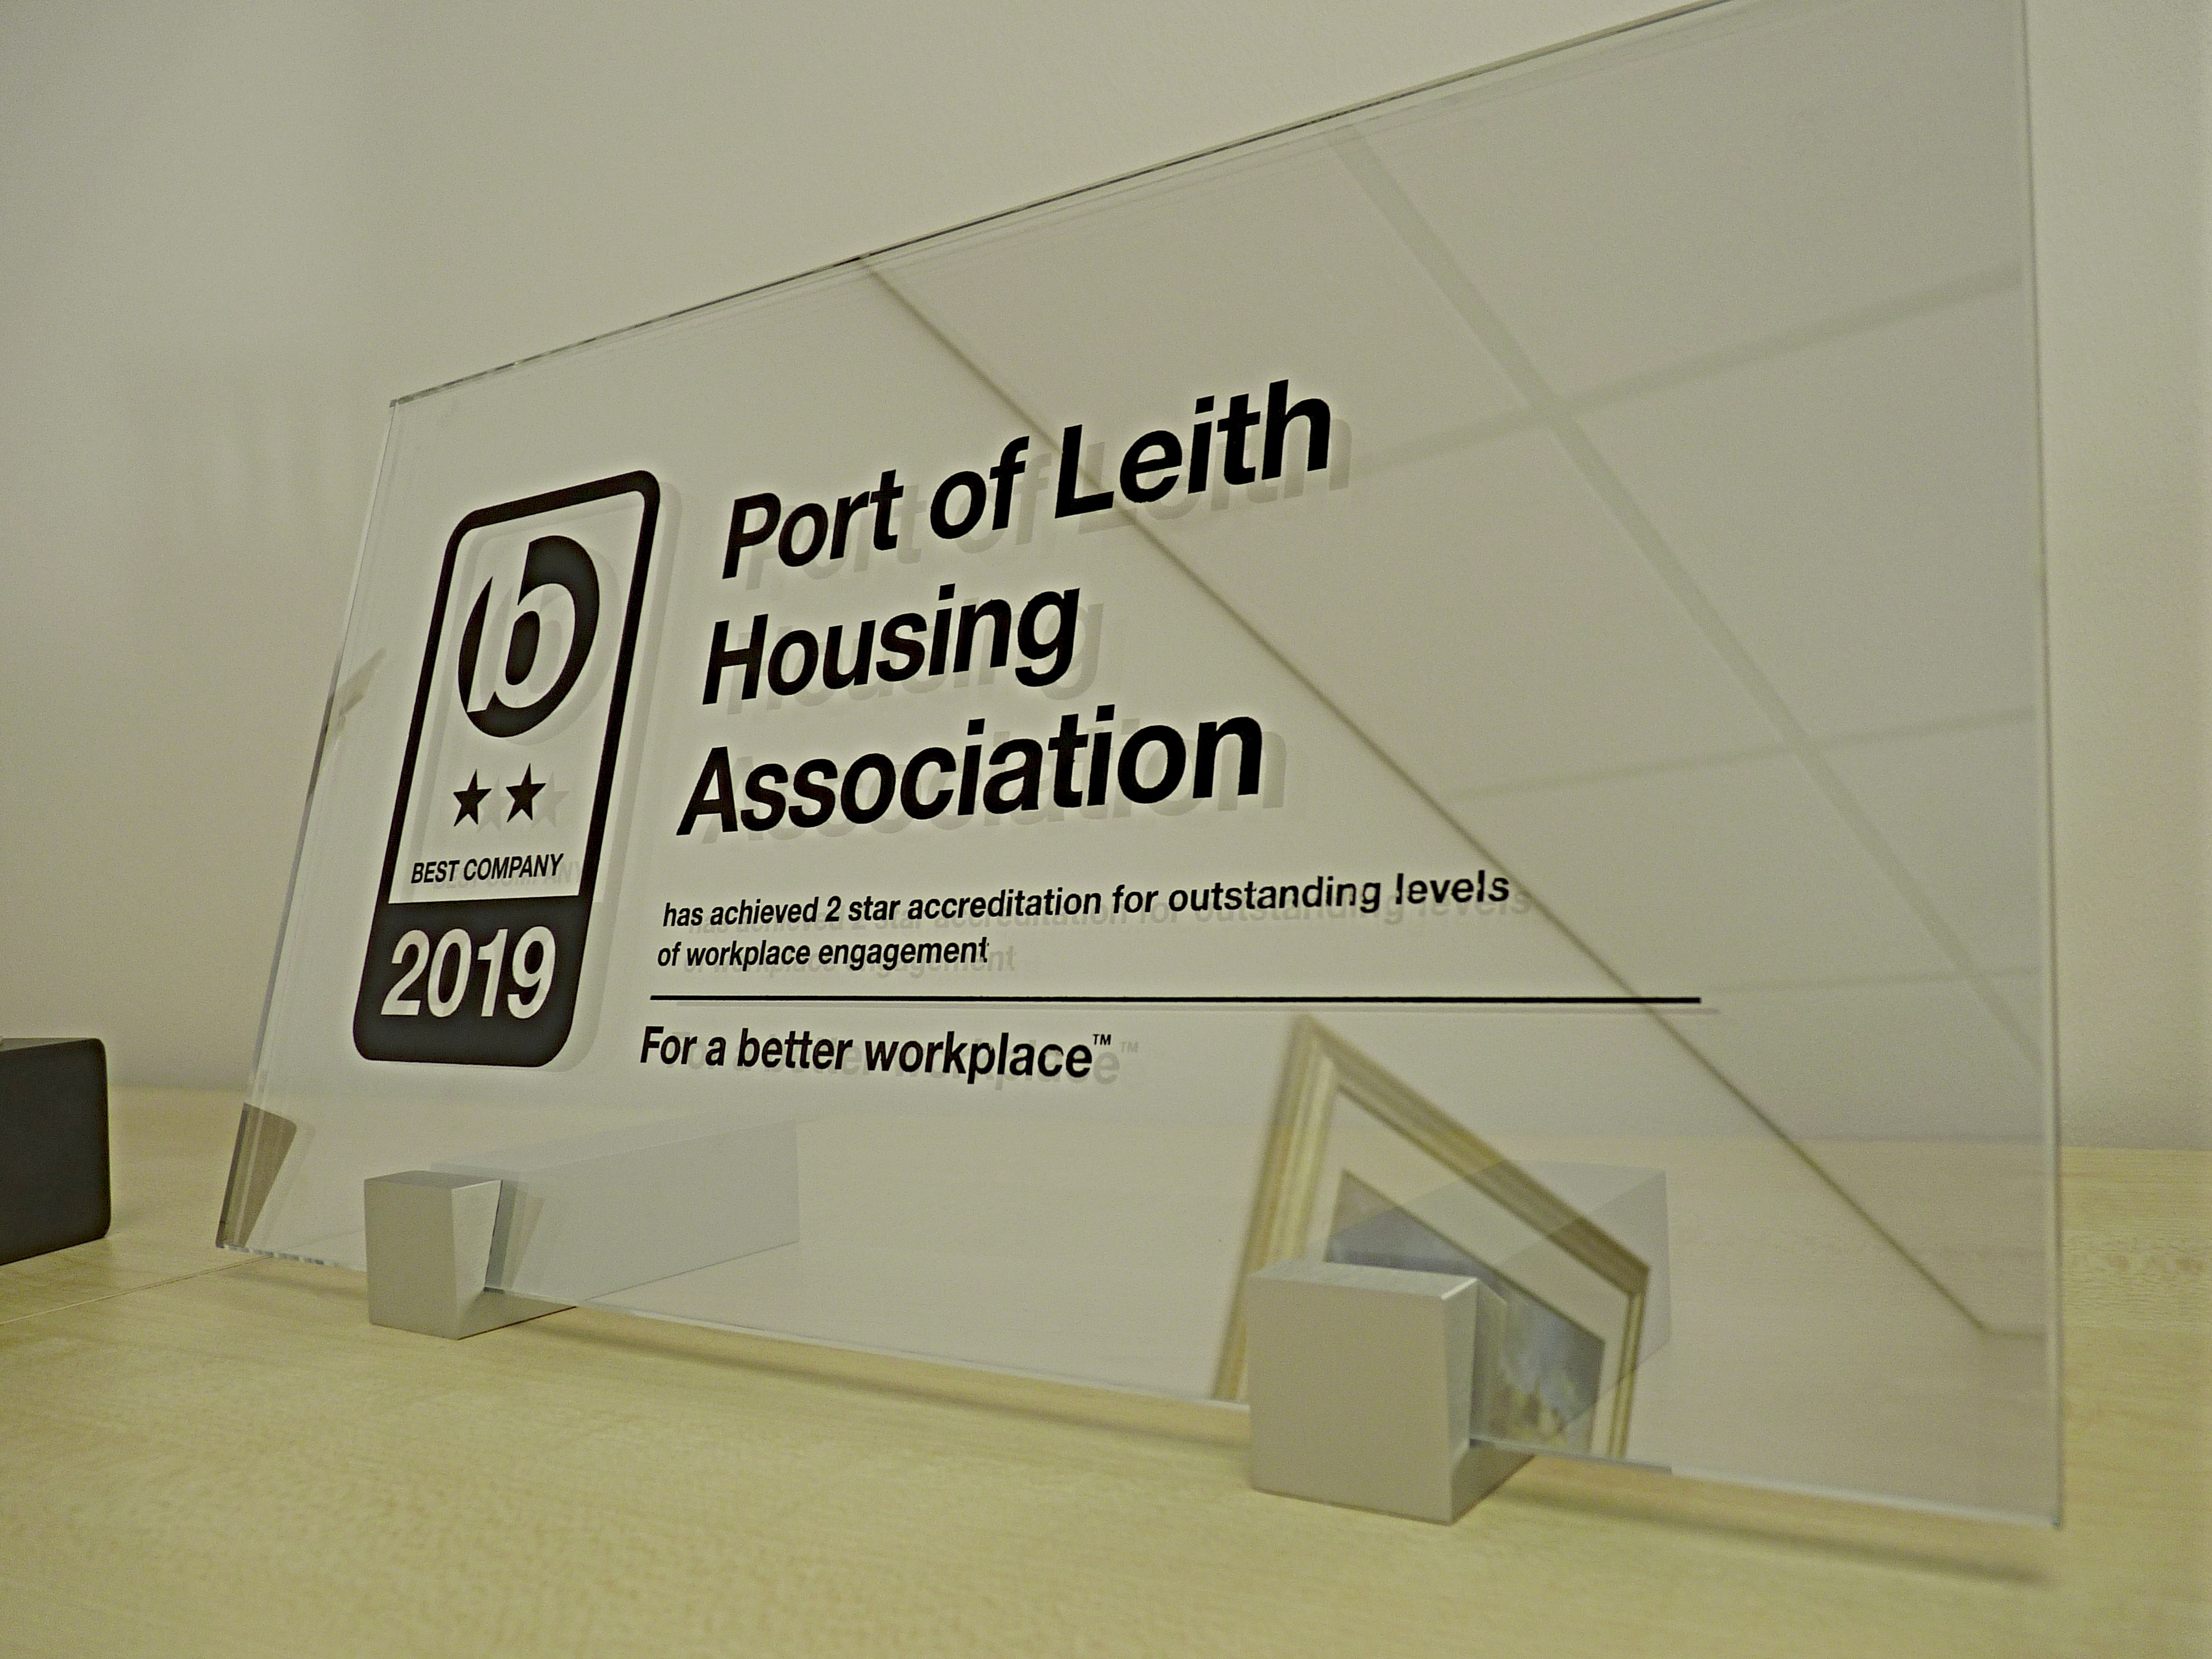 Port of Leith Housing Association named one of best companies to work for in Scotland